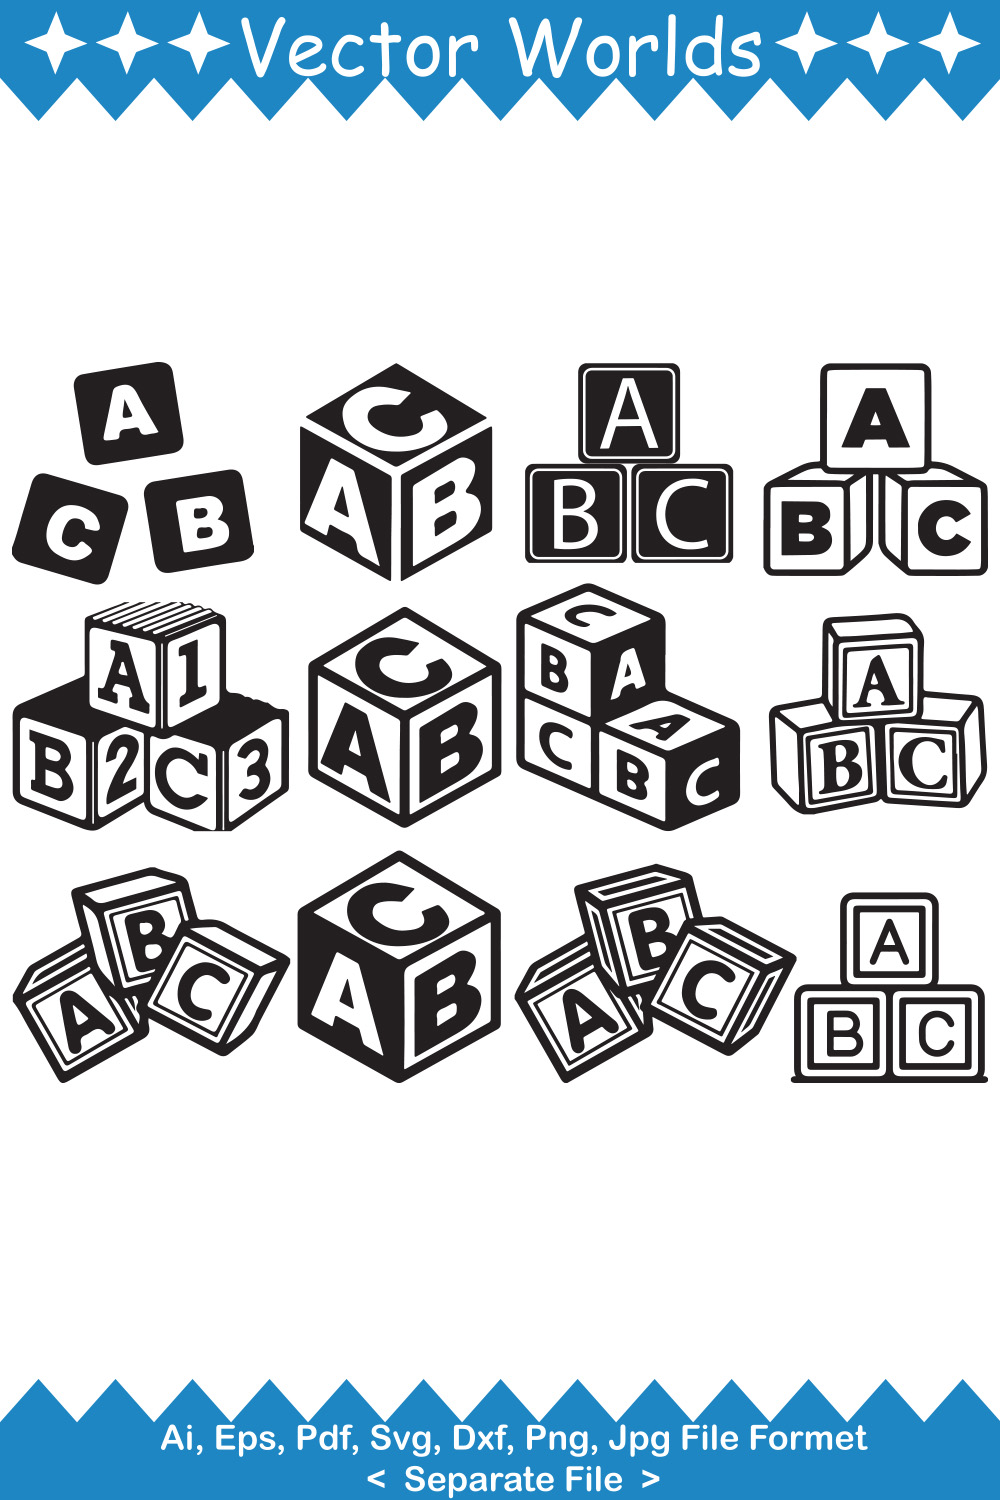 A selection of amazing vector images of alphabet cubes.